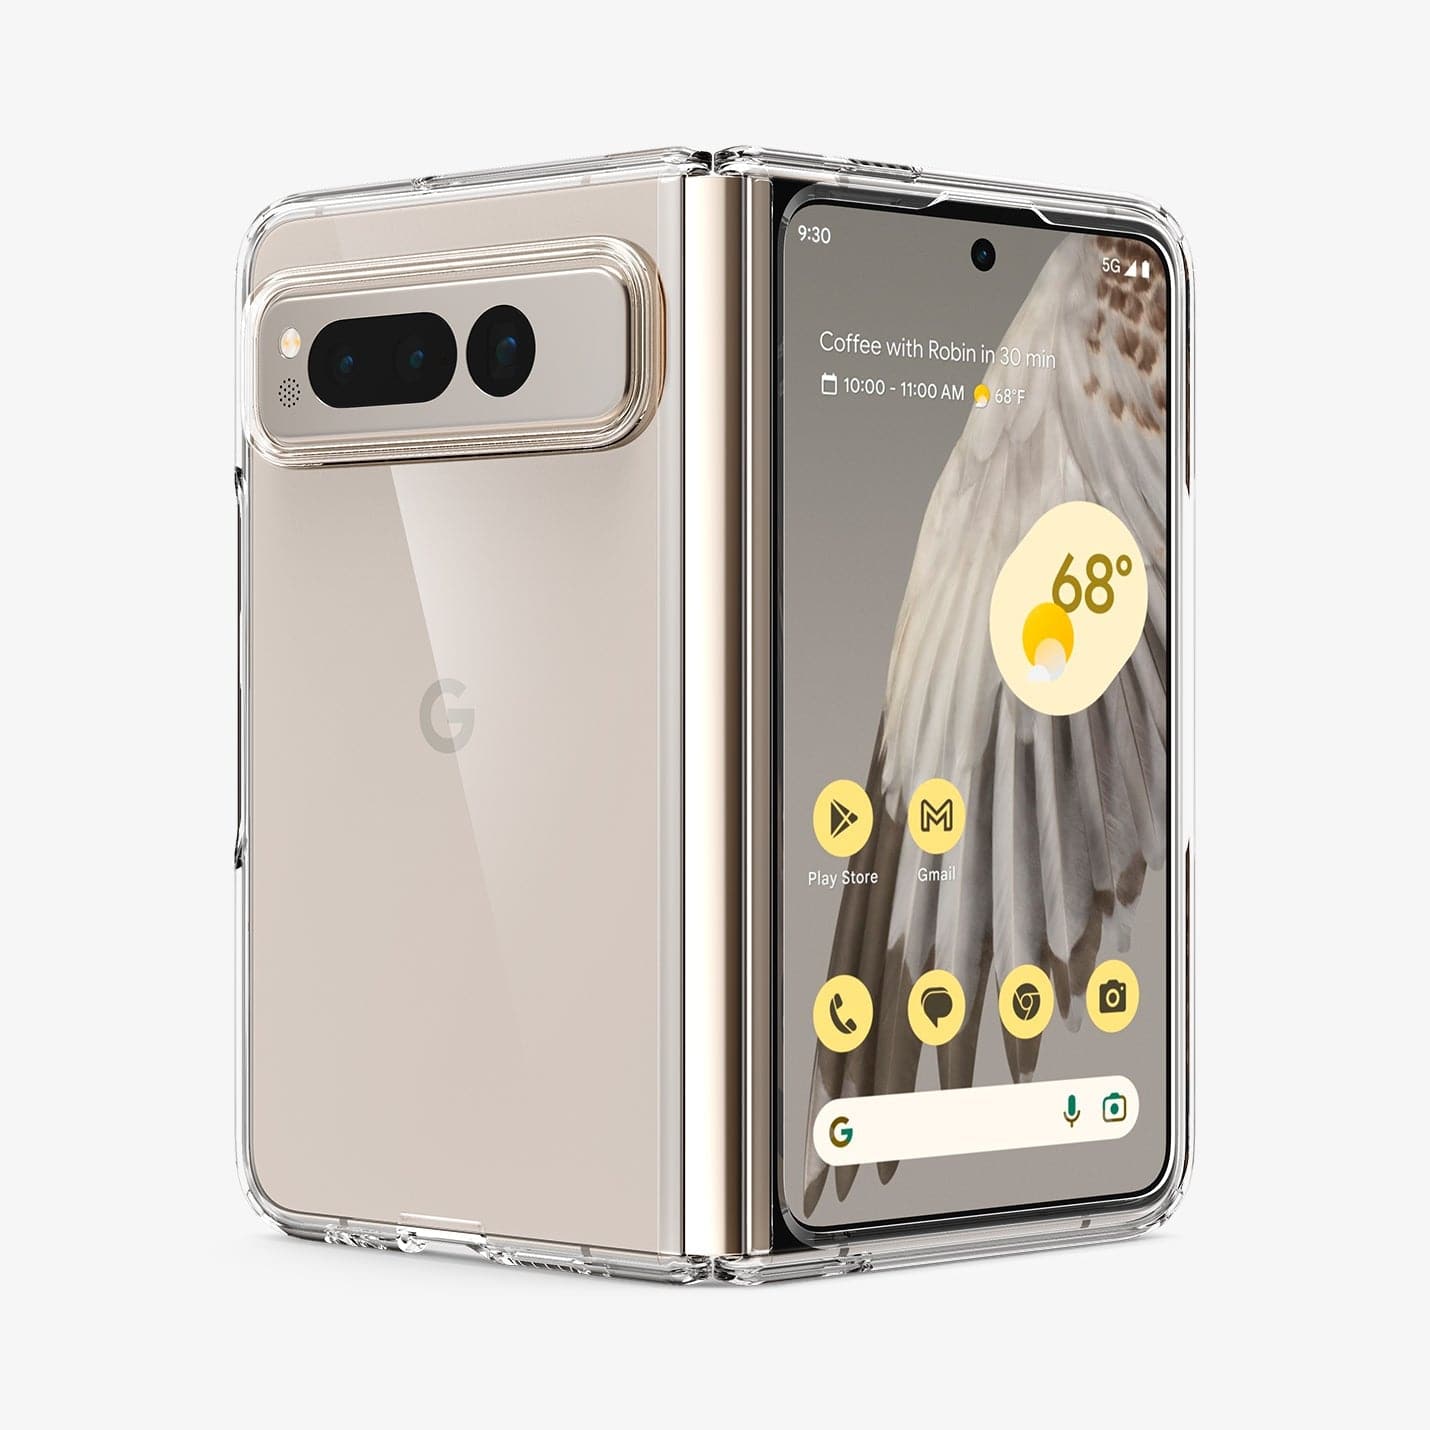 ACS05921 - Pixel Fold Series Case Ultra Hybrid in crystal clear showing the back, hinge and front